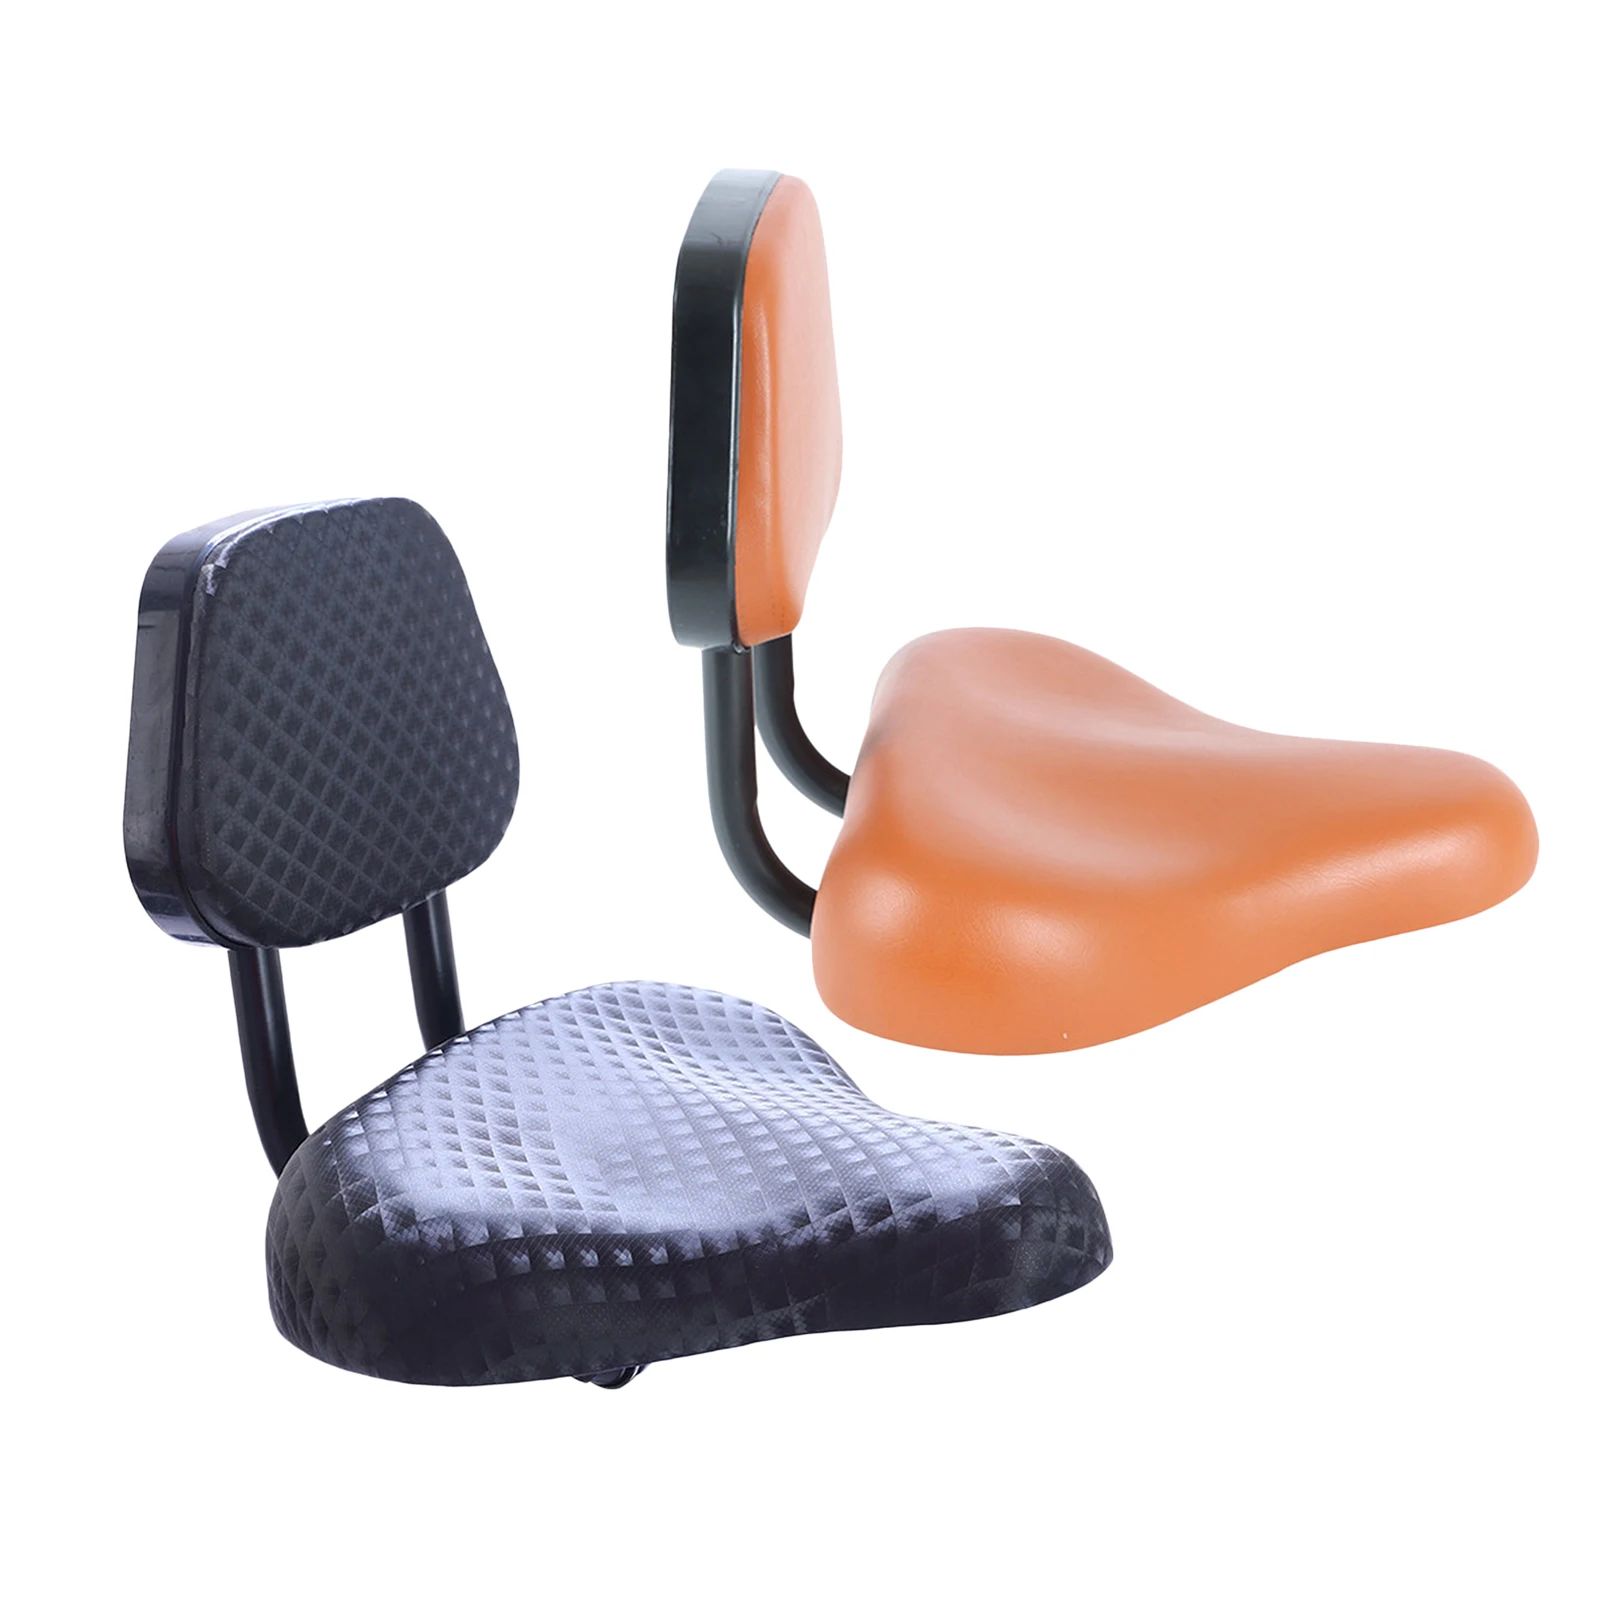 Bicycle Rear Seat Cushion Bike Back Seat Safety Cushion Backrest Support Safety Rest Rear for Mountain Bike Road Bicycle Parts